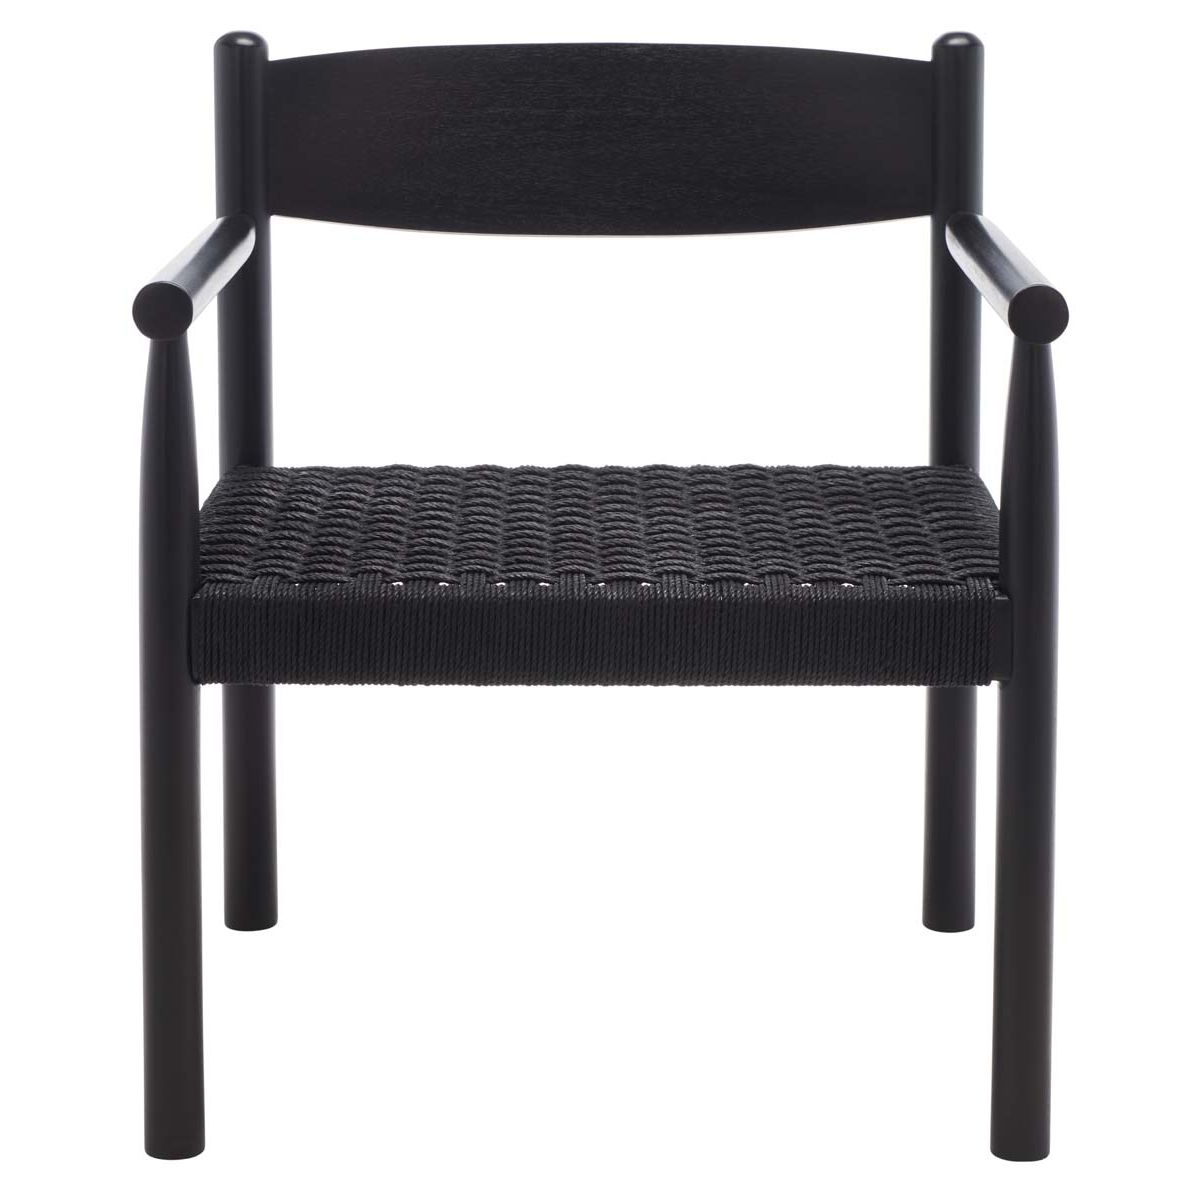 Safavieh Couture Adalee Danish Rope Accent Chair - Black